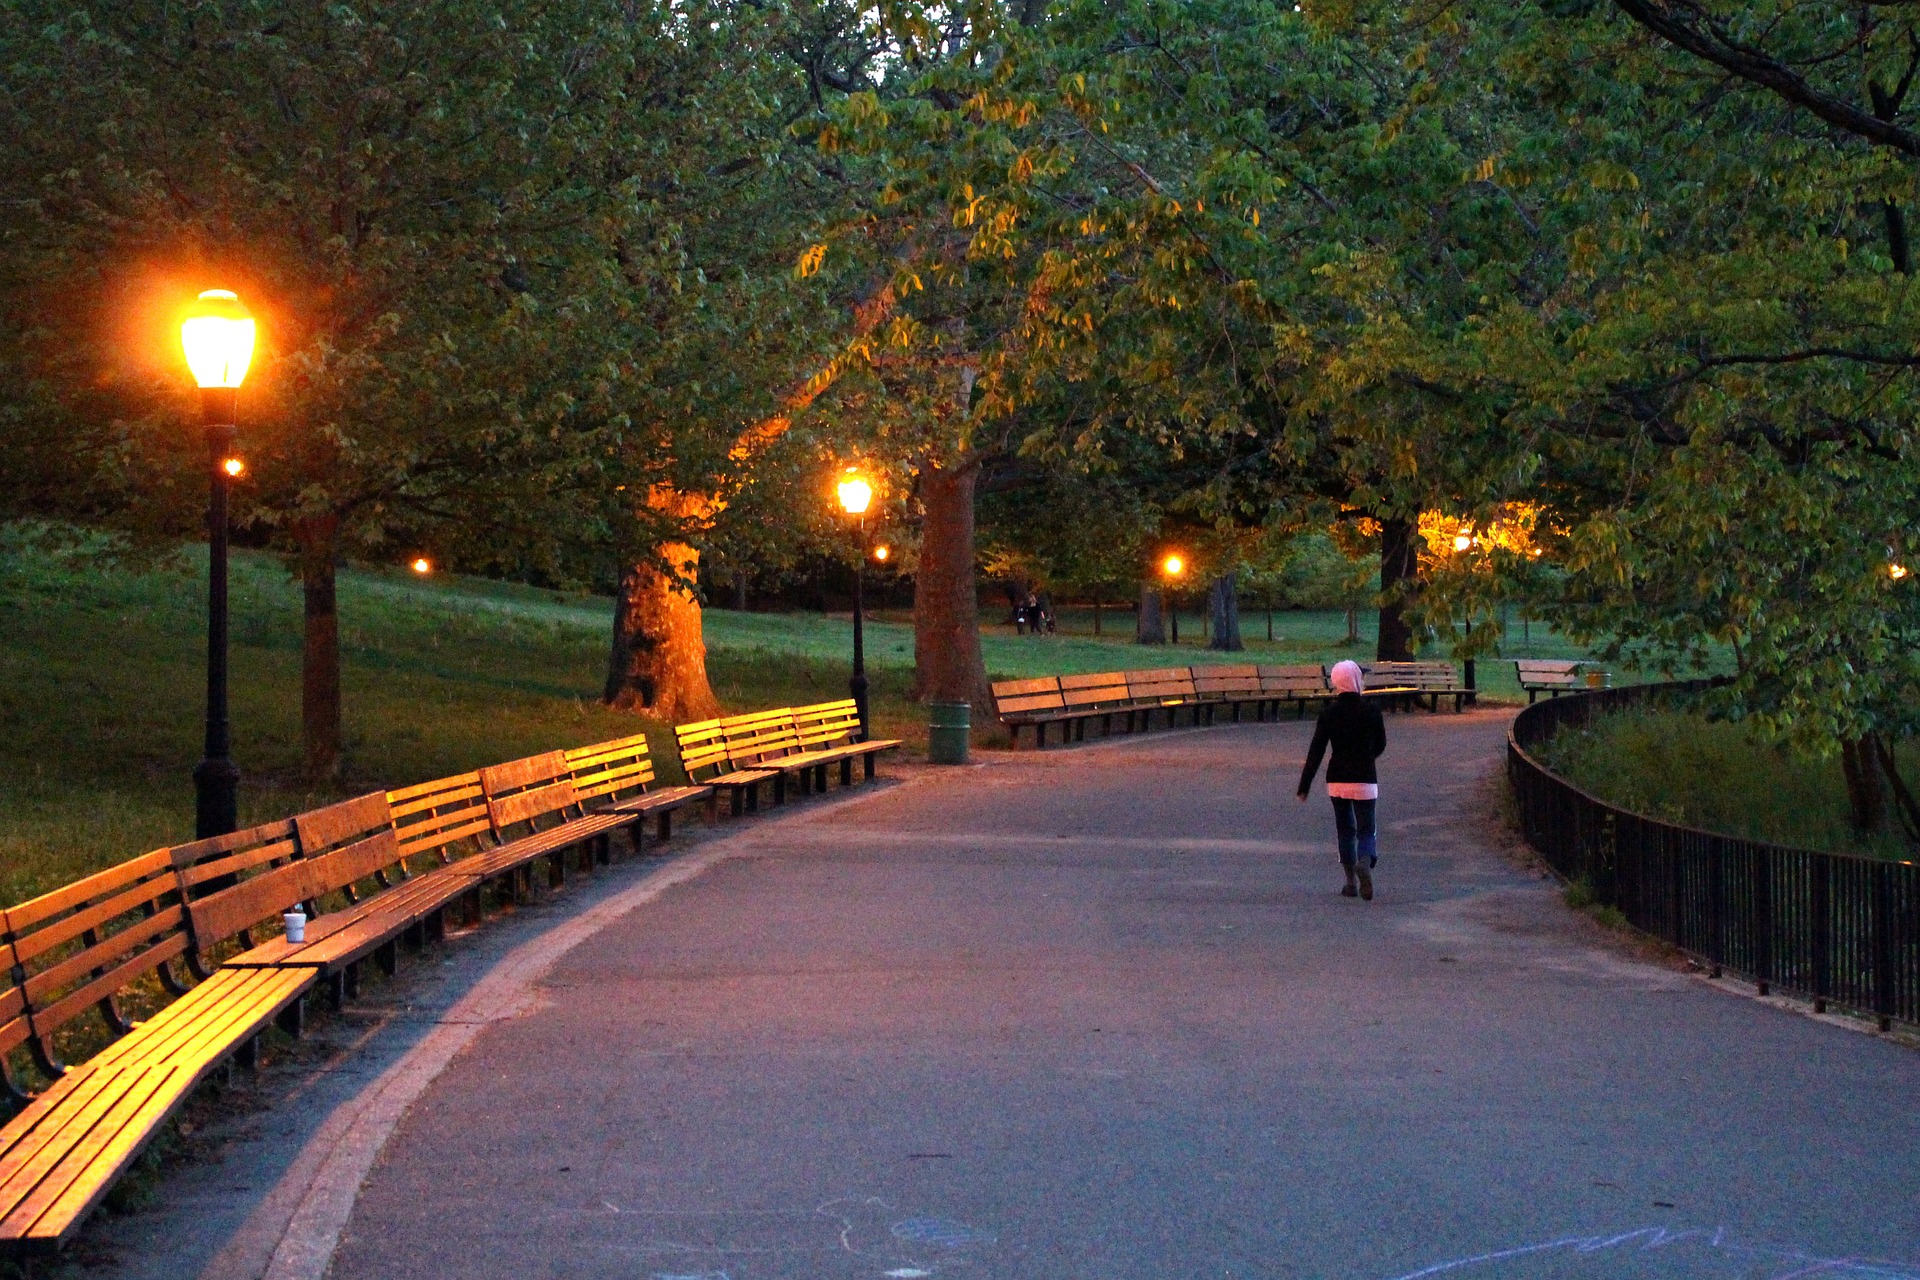 The Inwood neighborhood is home to the Inwood Hill Park, a favorite place among locals to go for an evening stroll.